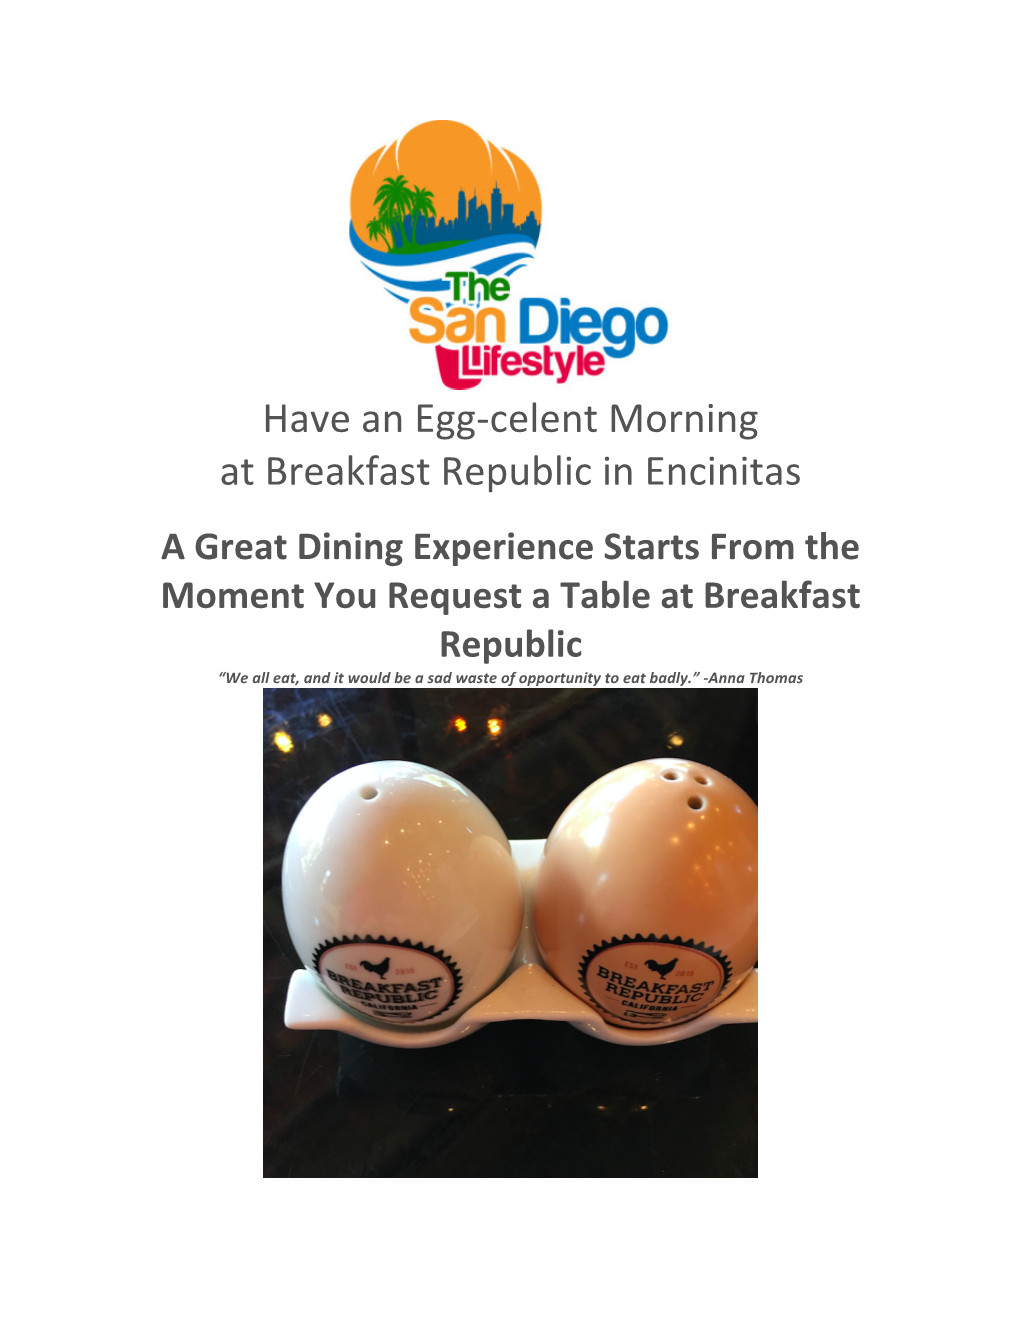 Have an Egg-Celent Morning at Breakfast Republic in Encinitas